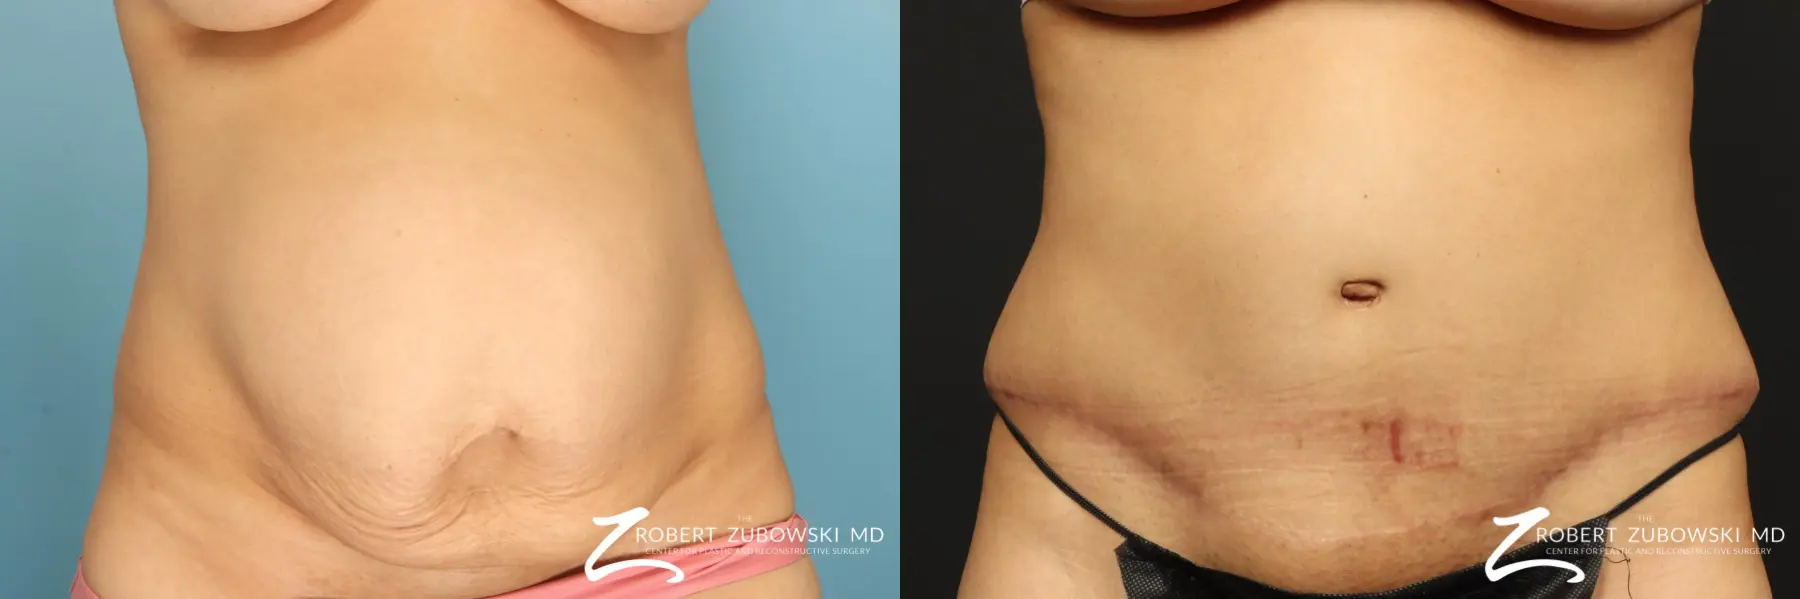 Tummy Tuck: Patient 29 - Before and After 1